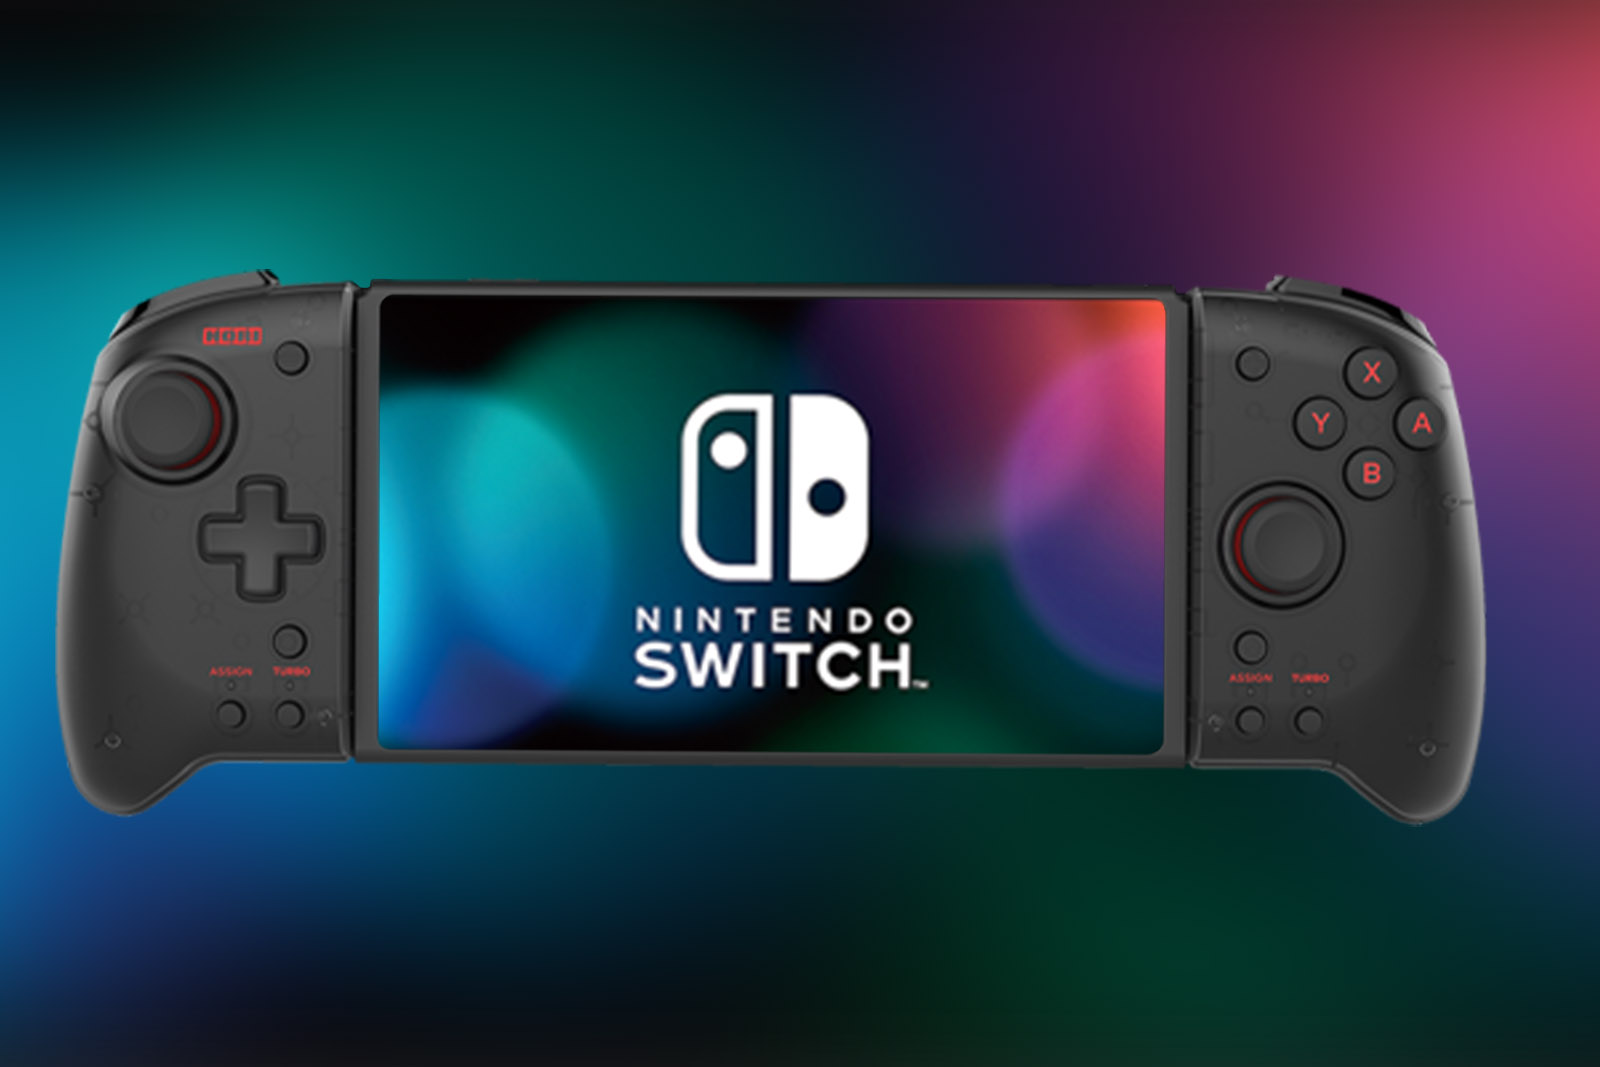 Here's the Nintendo Switch next to the Wii U GamePad, a 3DS XL, a phone and  more - Polygon